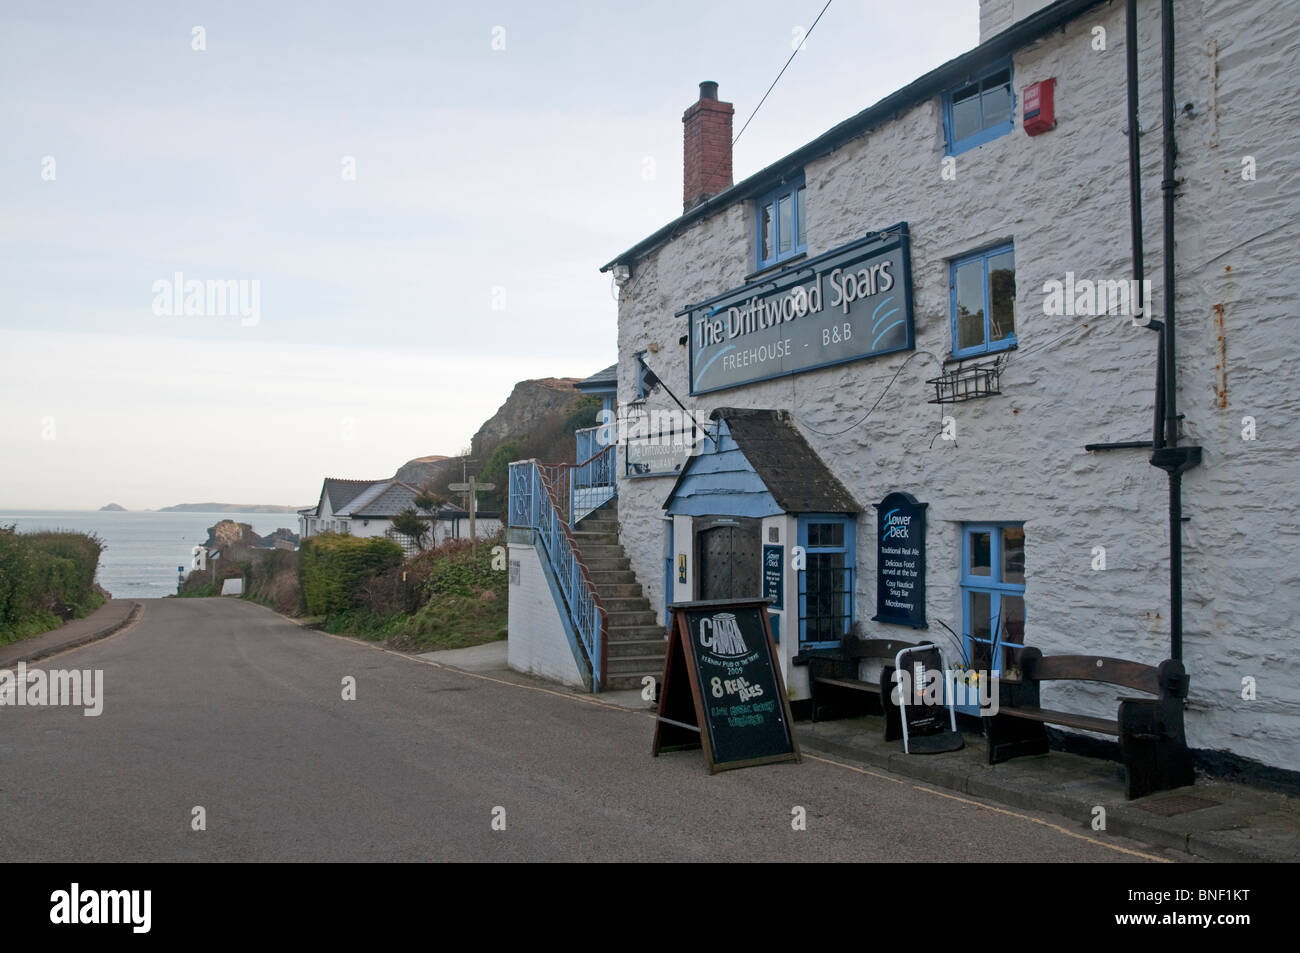 Driftwood Spars pub and hotel in Trevaunance Cove, St Agnes, Cornwall Stock Photo